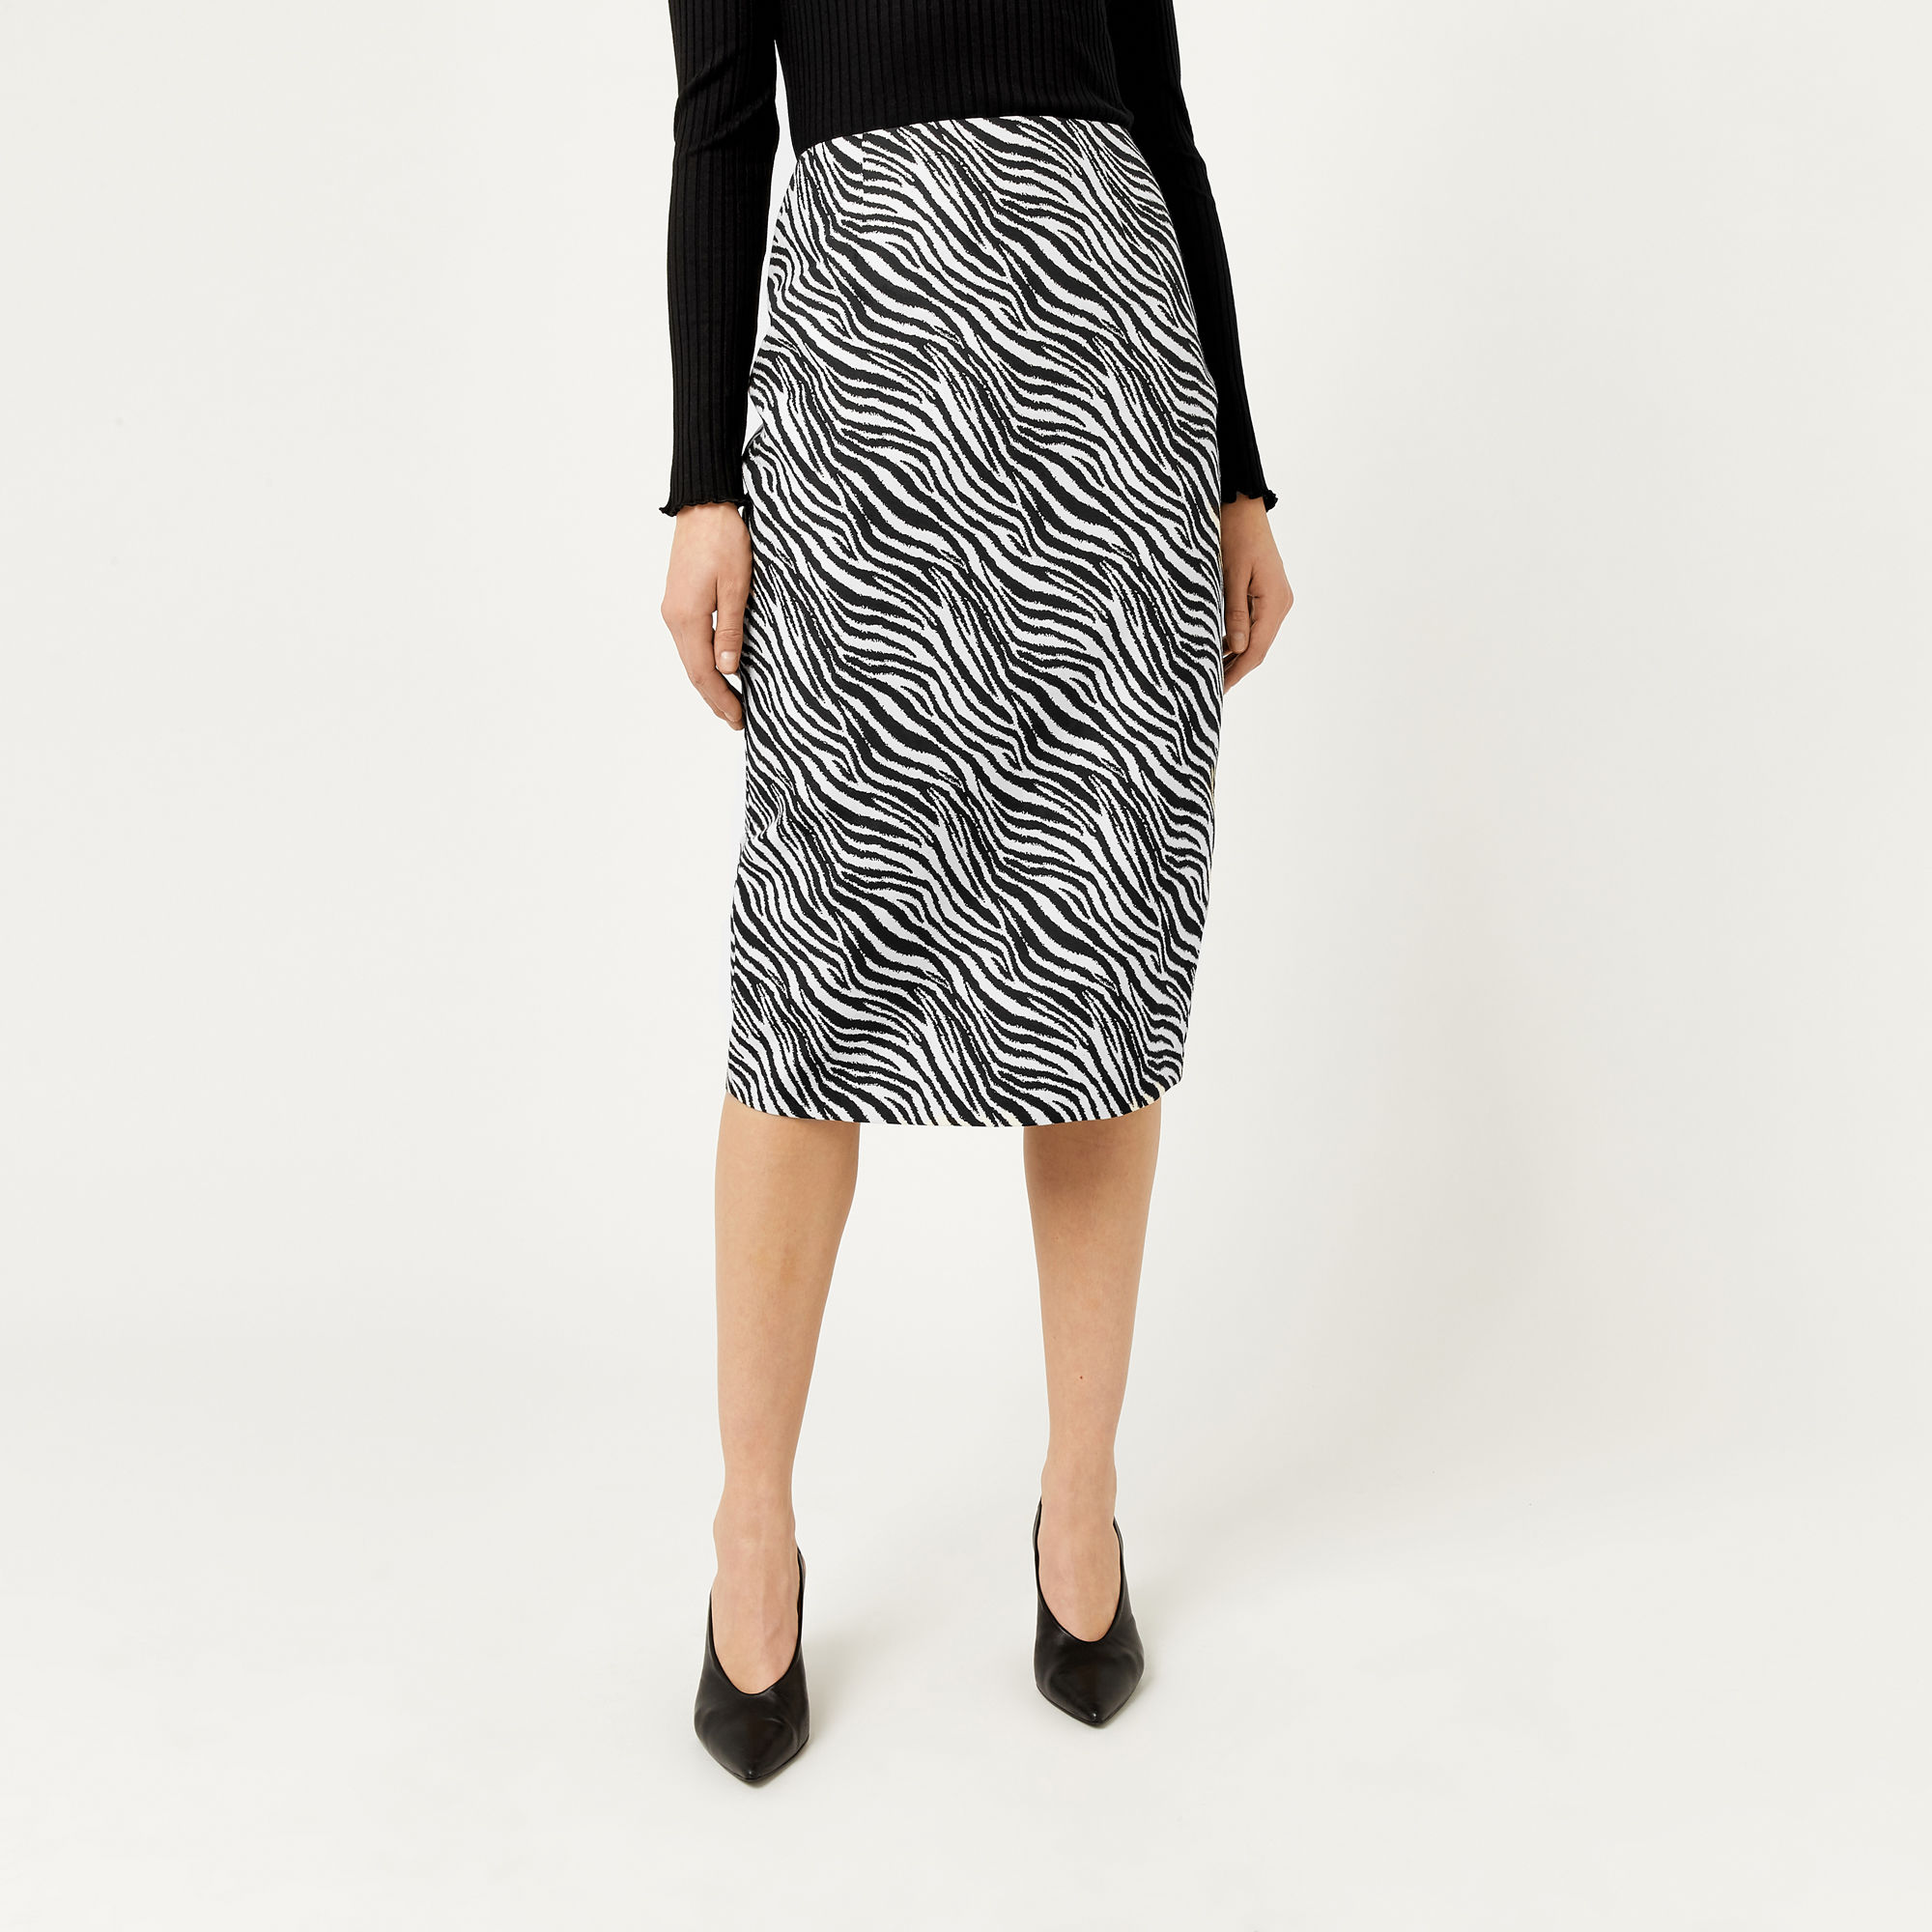 10 Non-Boring Pencil Skirts You Can Wear to the Office | Preview.ph